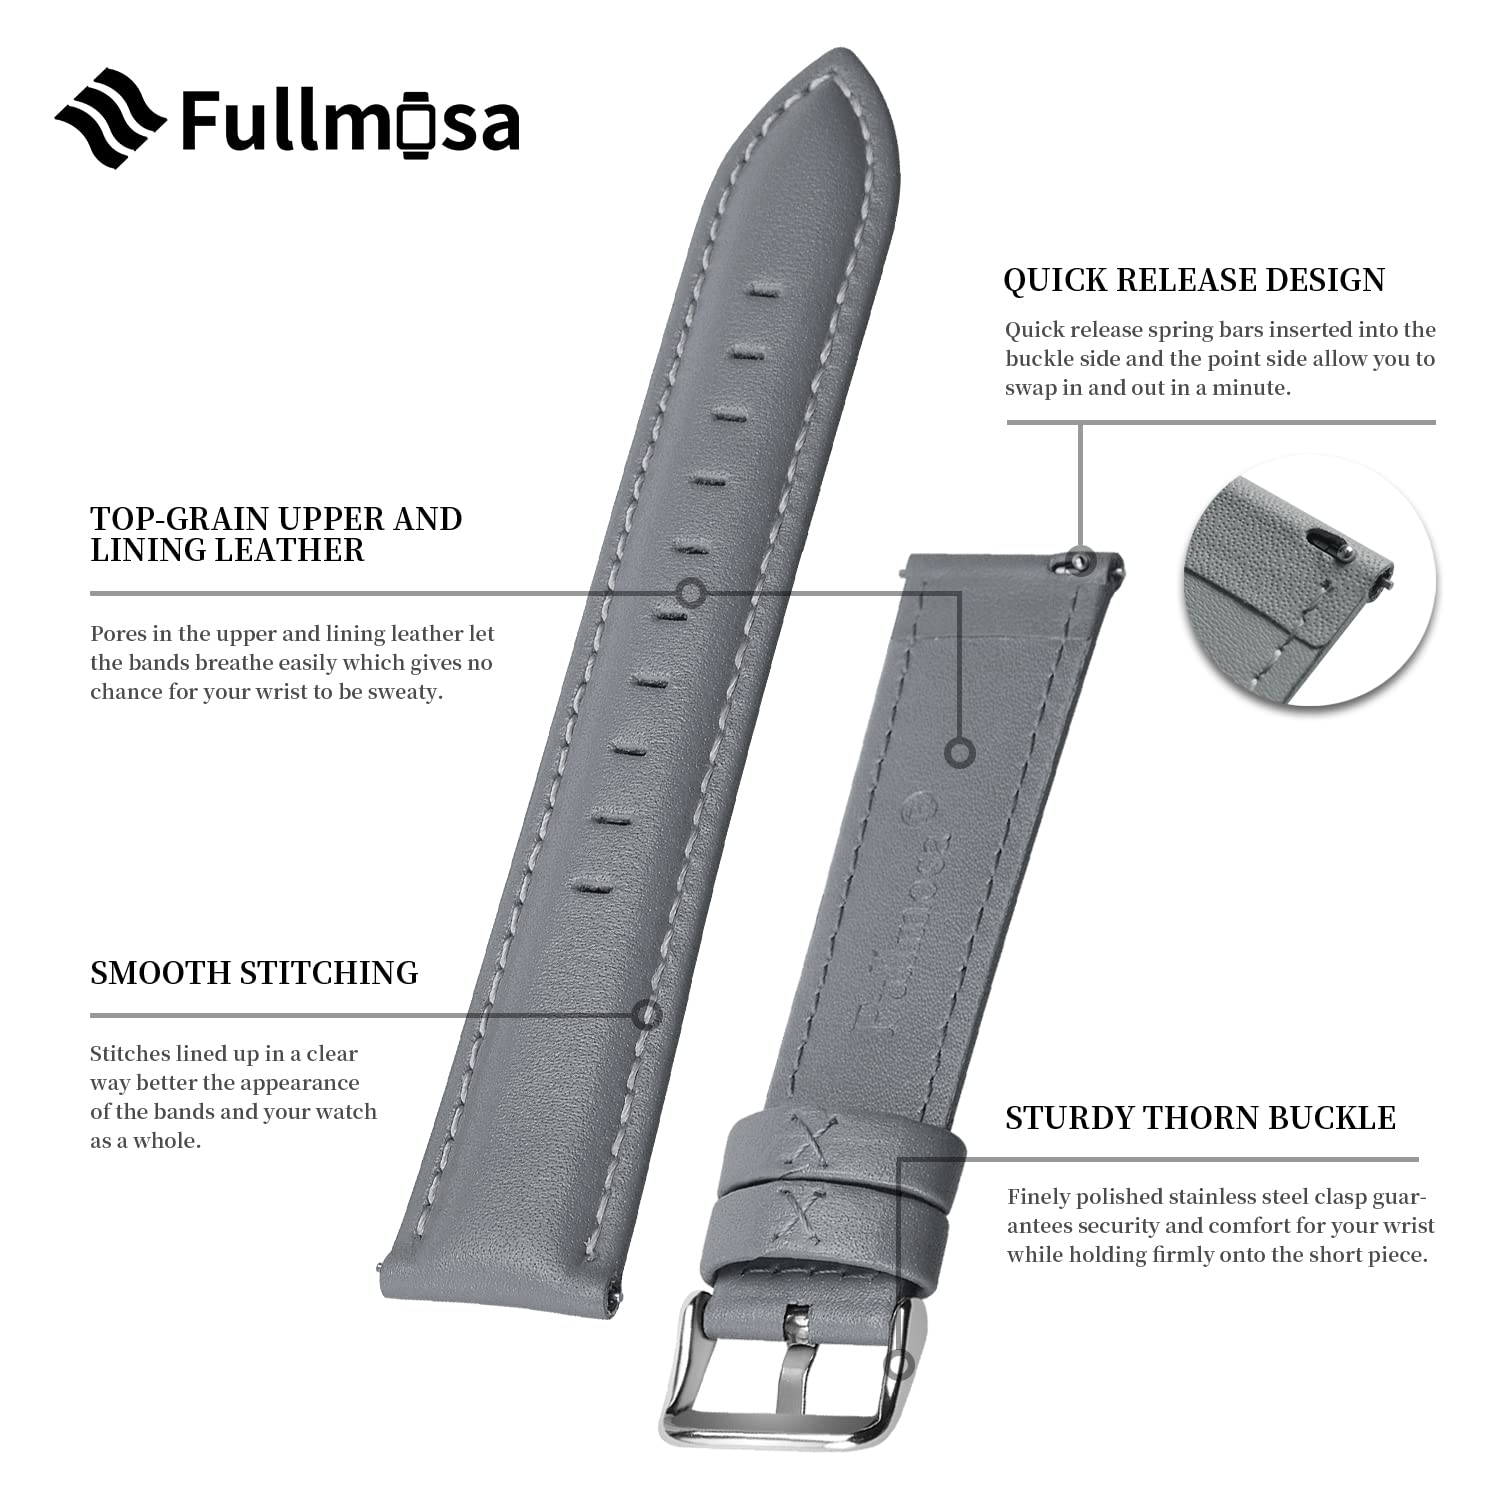 Fullmosa 22mm Leather Watch Bands Compatible with Samsung Galaxy Watch 46mm,Galaxy Watch 3 45mm,Gear S3 Frontier/Classic,Huawei Watch GT,Garmin Vivoactive 4/Forerunner 945,Grey